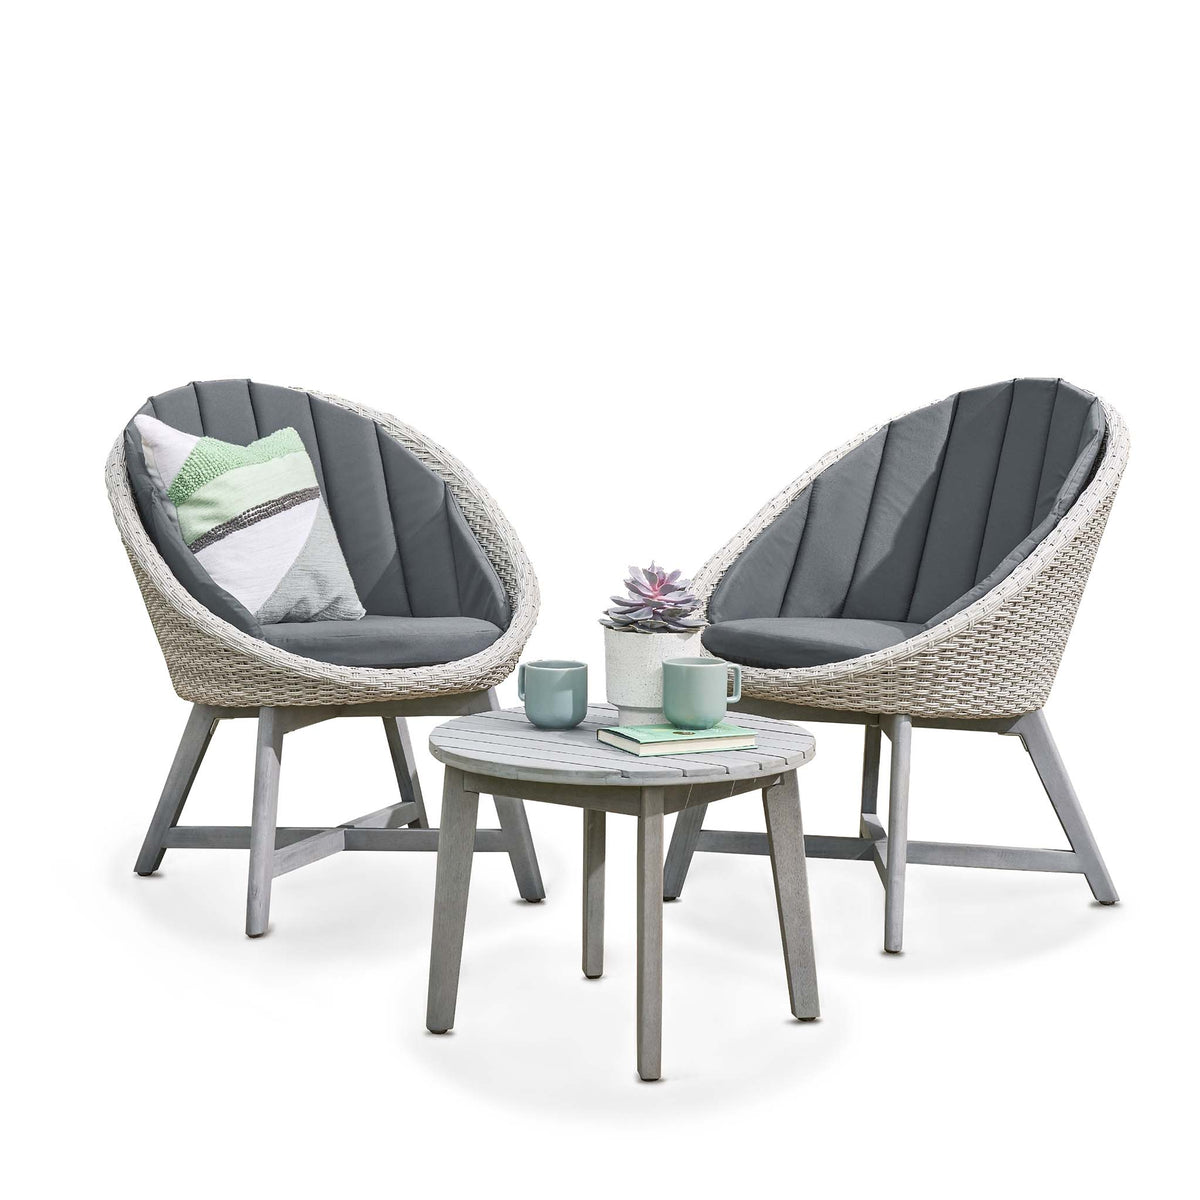 Chatsworth Curved Rattan Bistro Set by Roseland Furniture